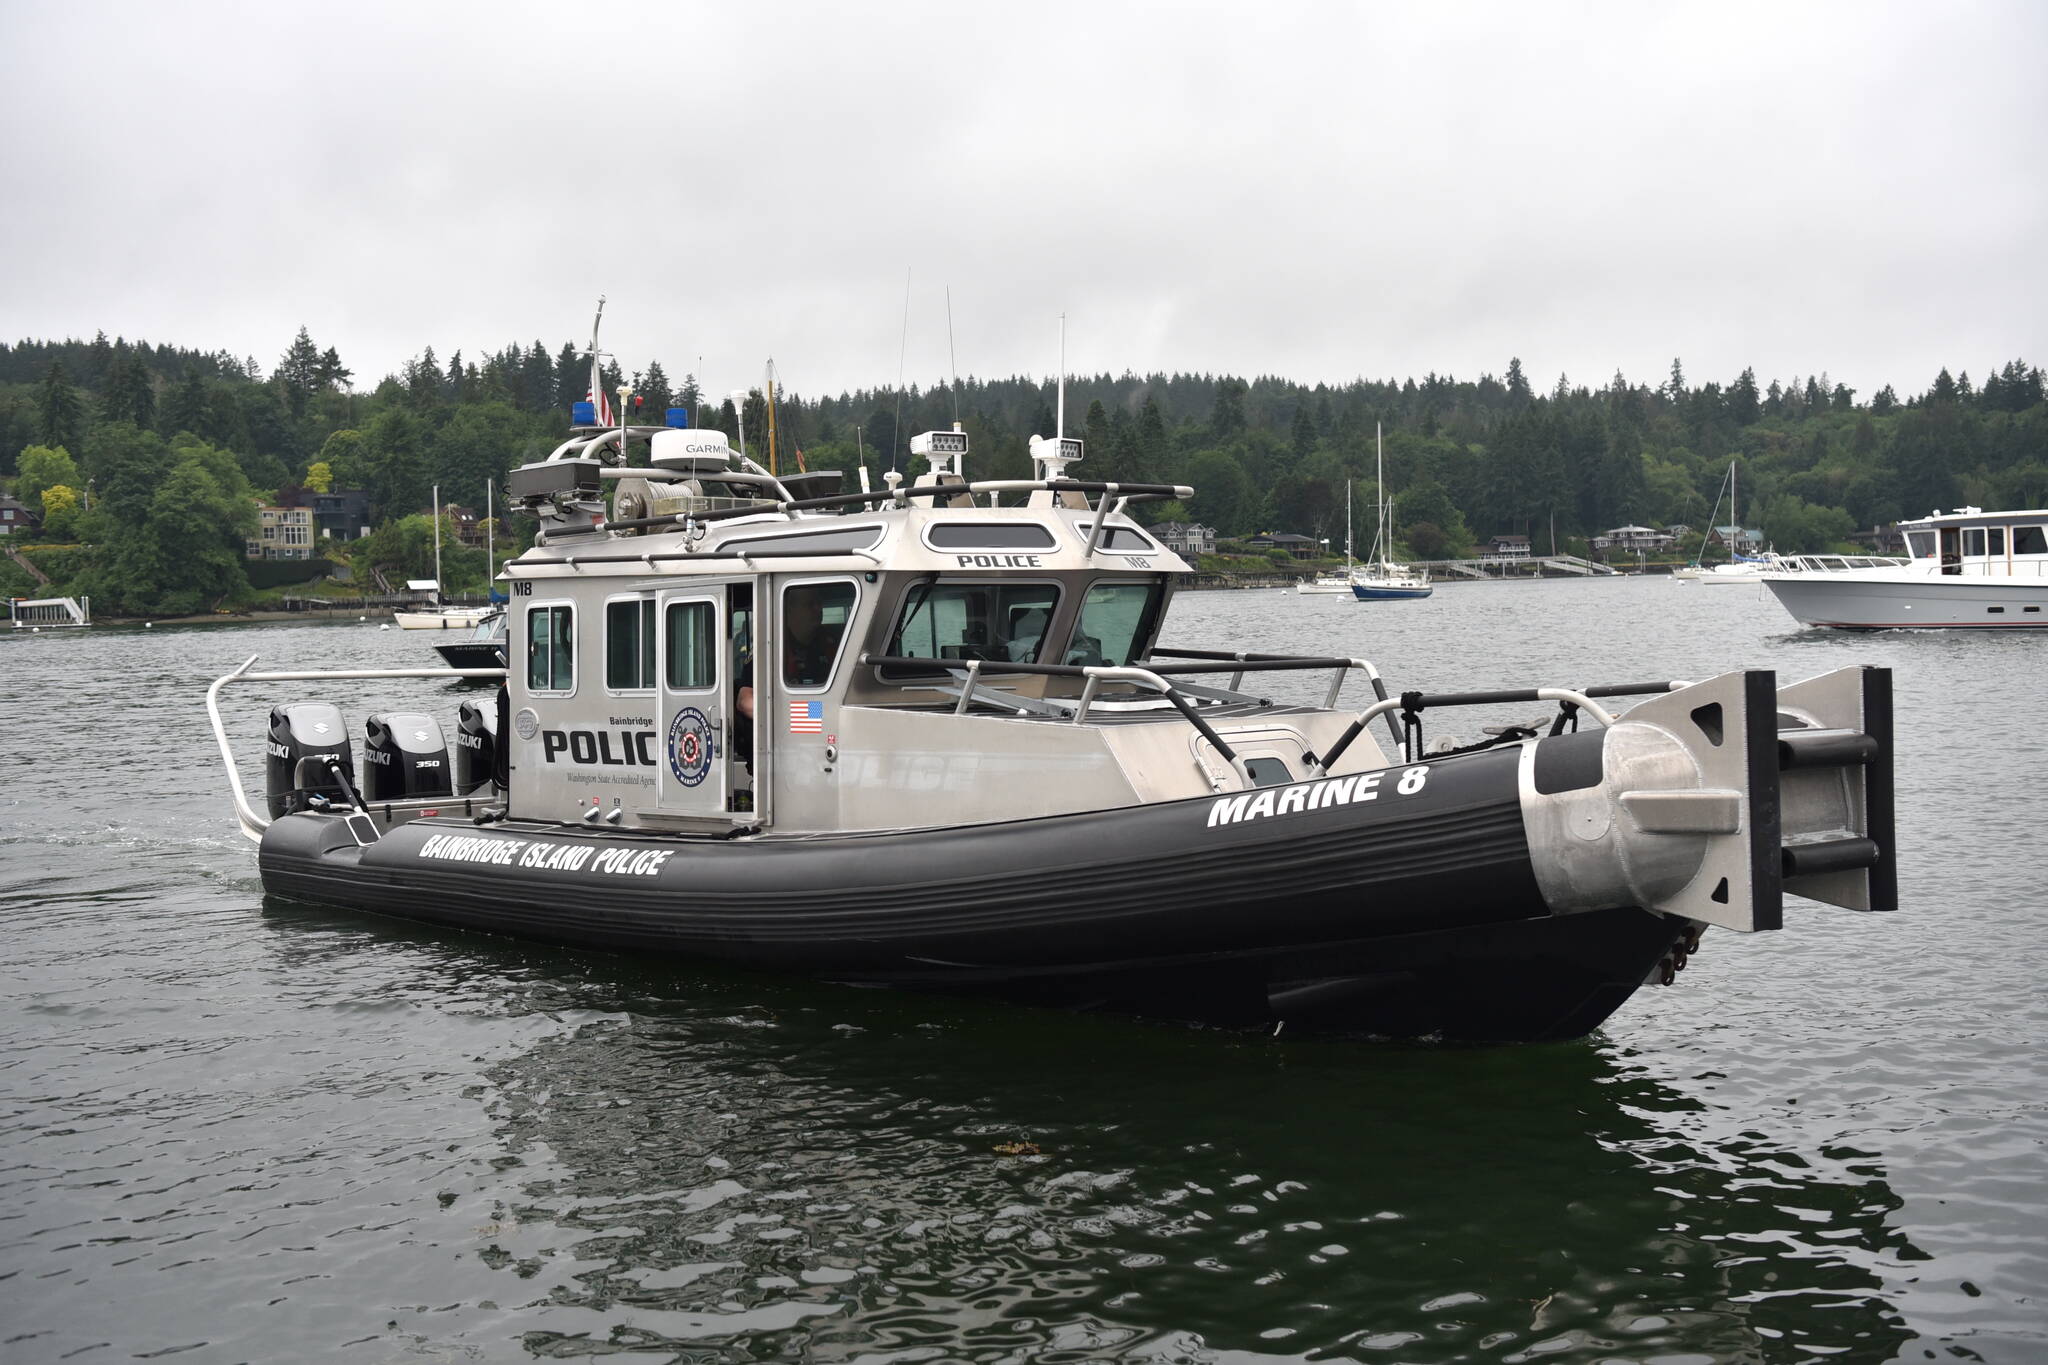 Visitors were able to see the Bainbridge Island Police Department SAFE boat in Eagle Harbor.